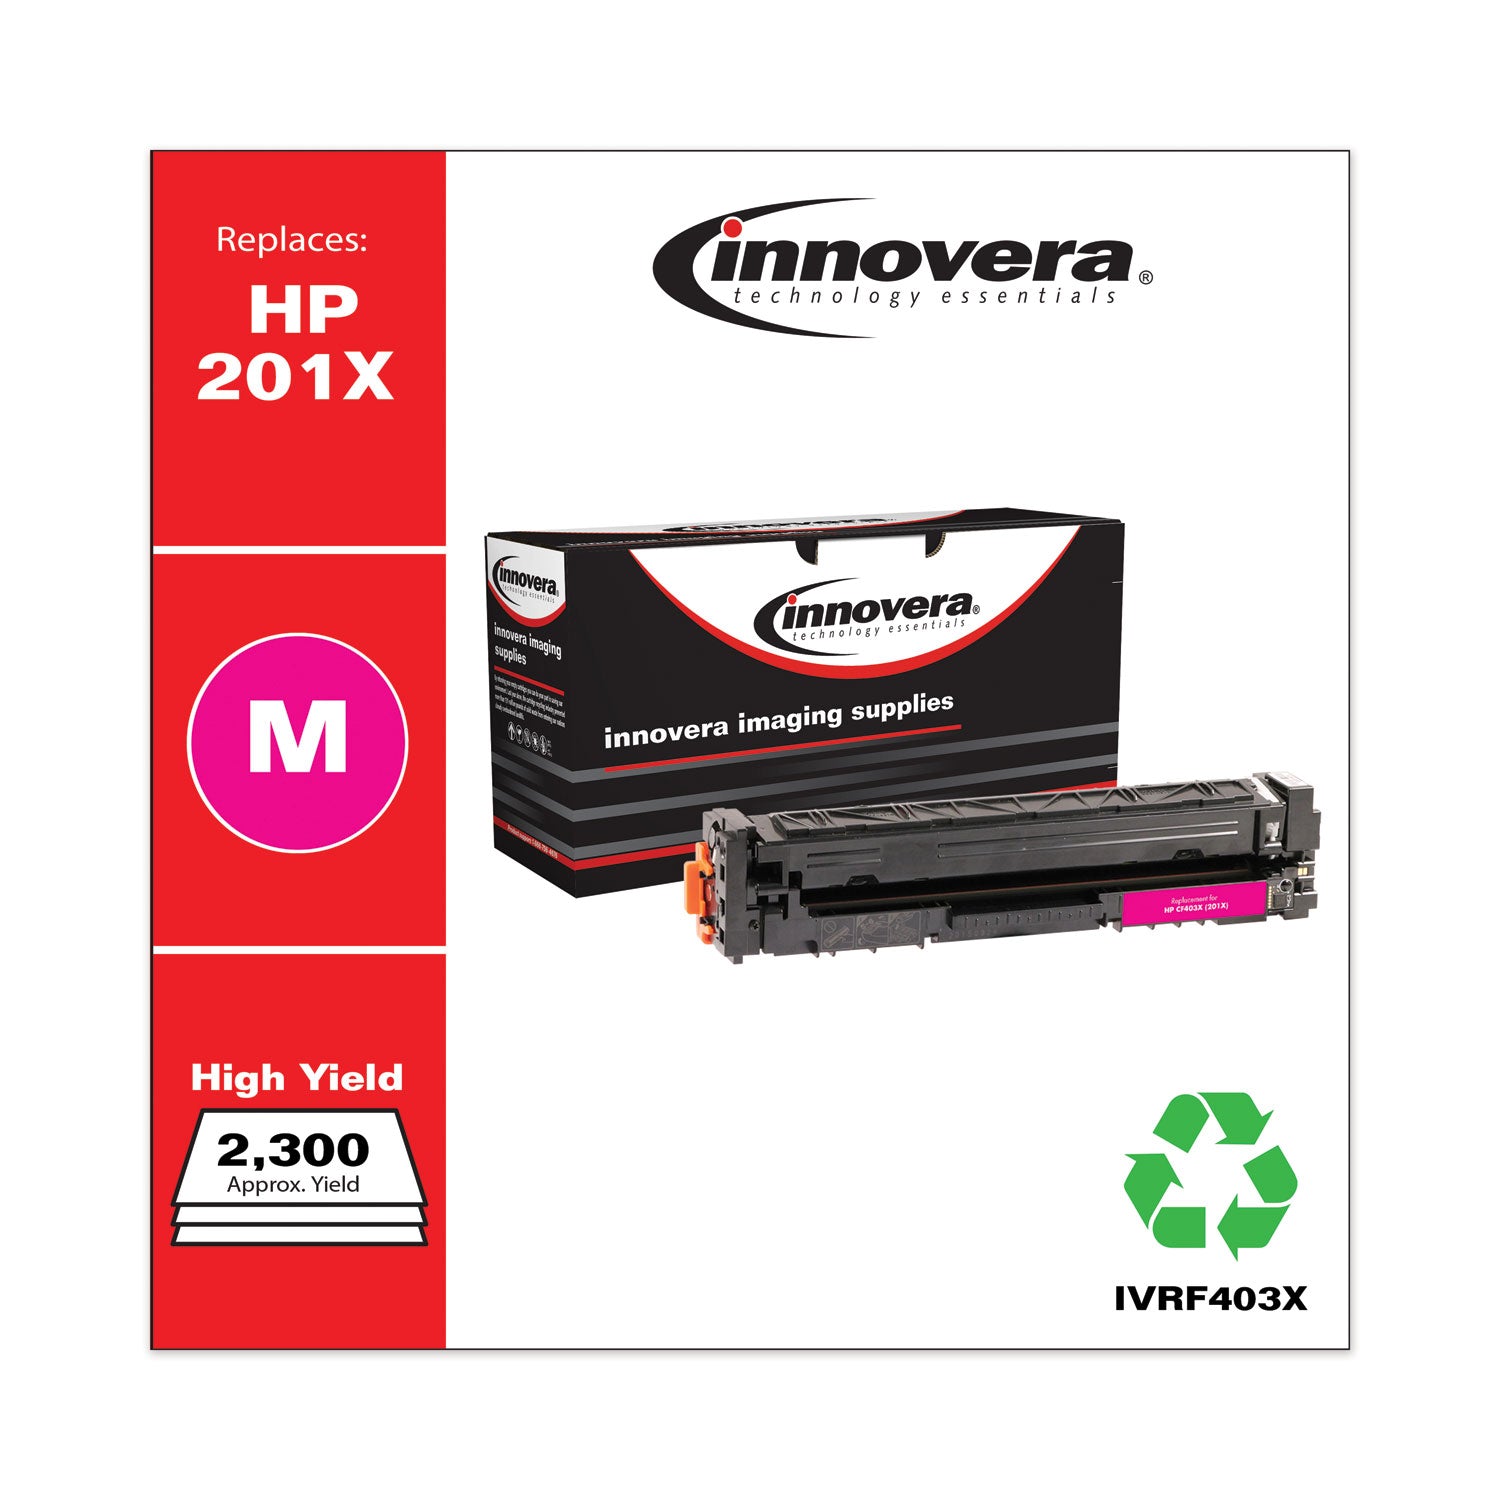 remanufactured-magenta-high-yield-toner-replacement-for-201x-cf403x-2300-page-yield-ships-in-1-3-business-days_ivrf403x - 2